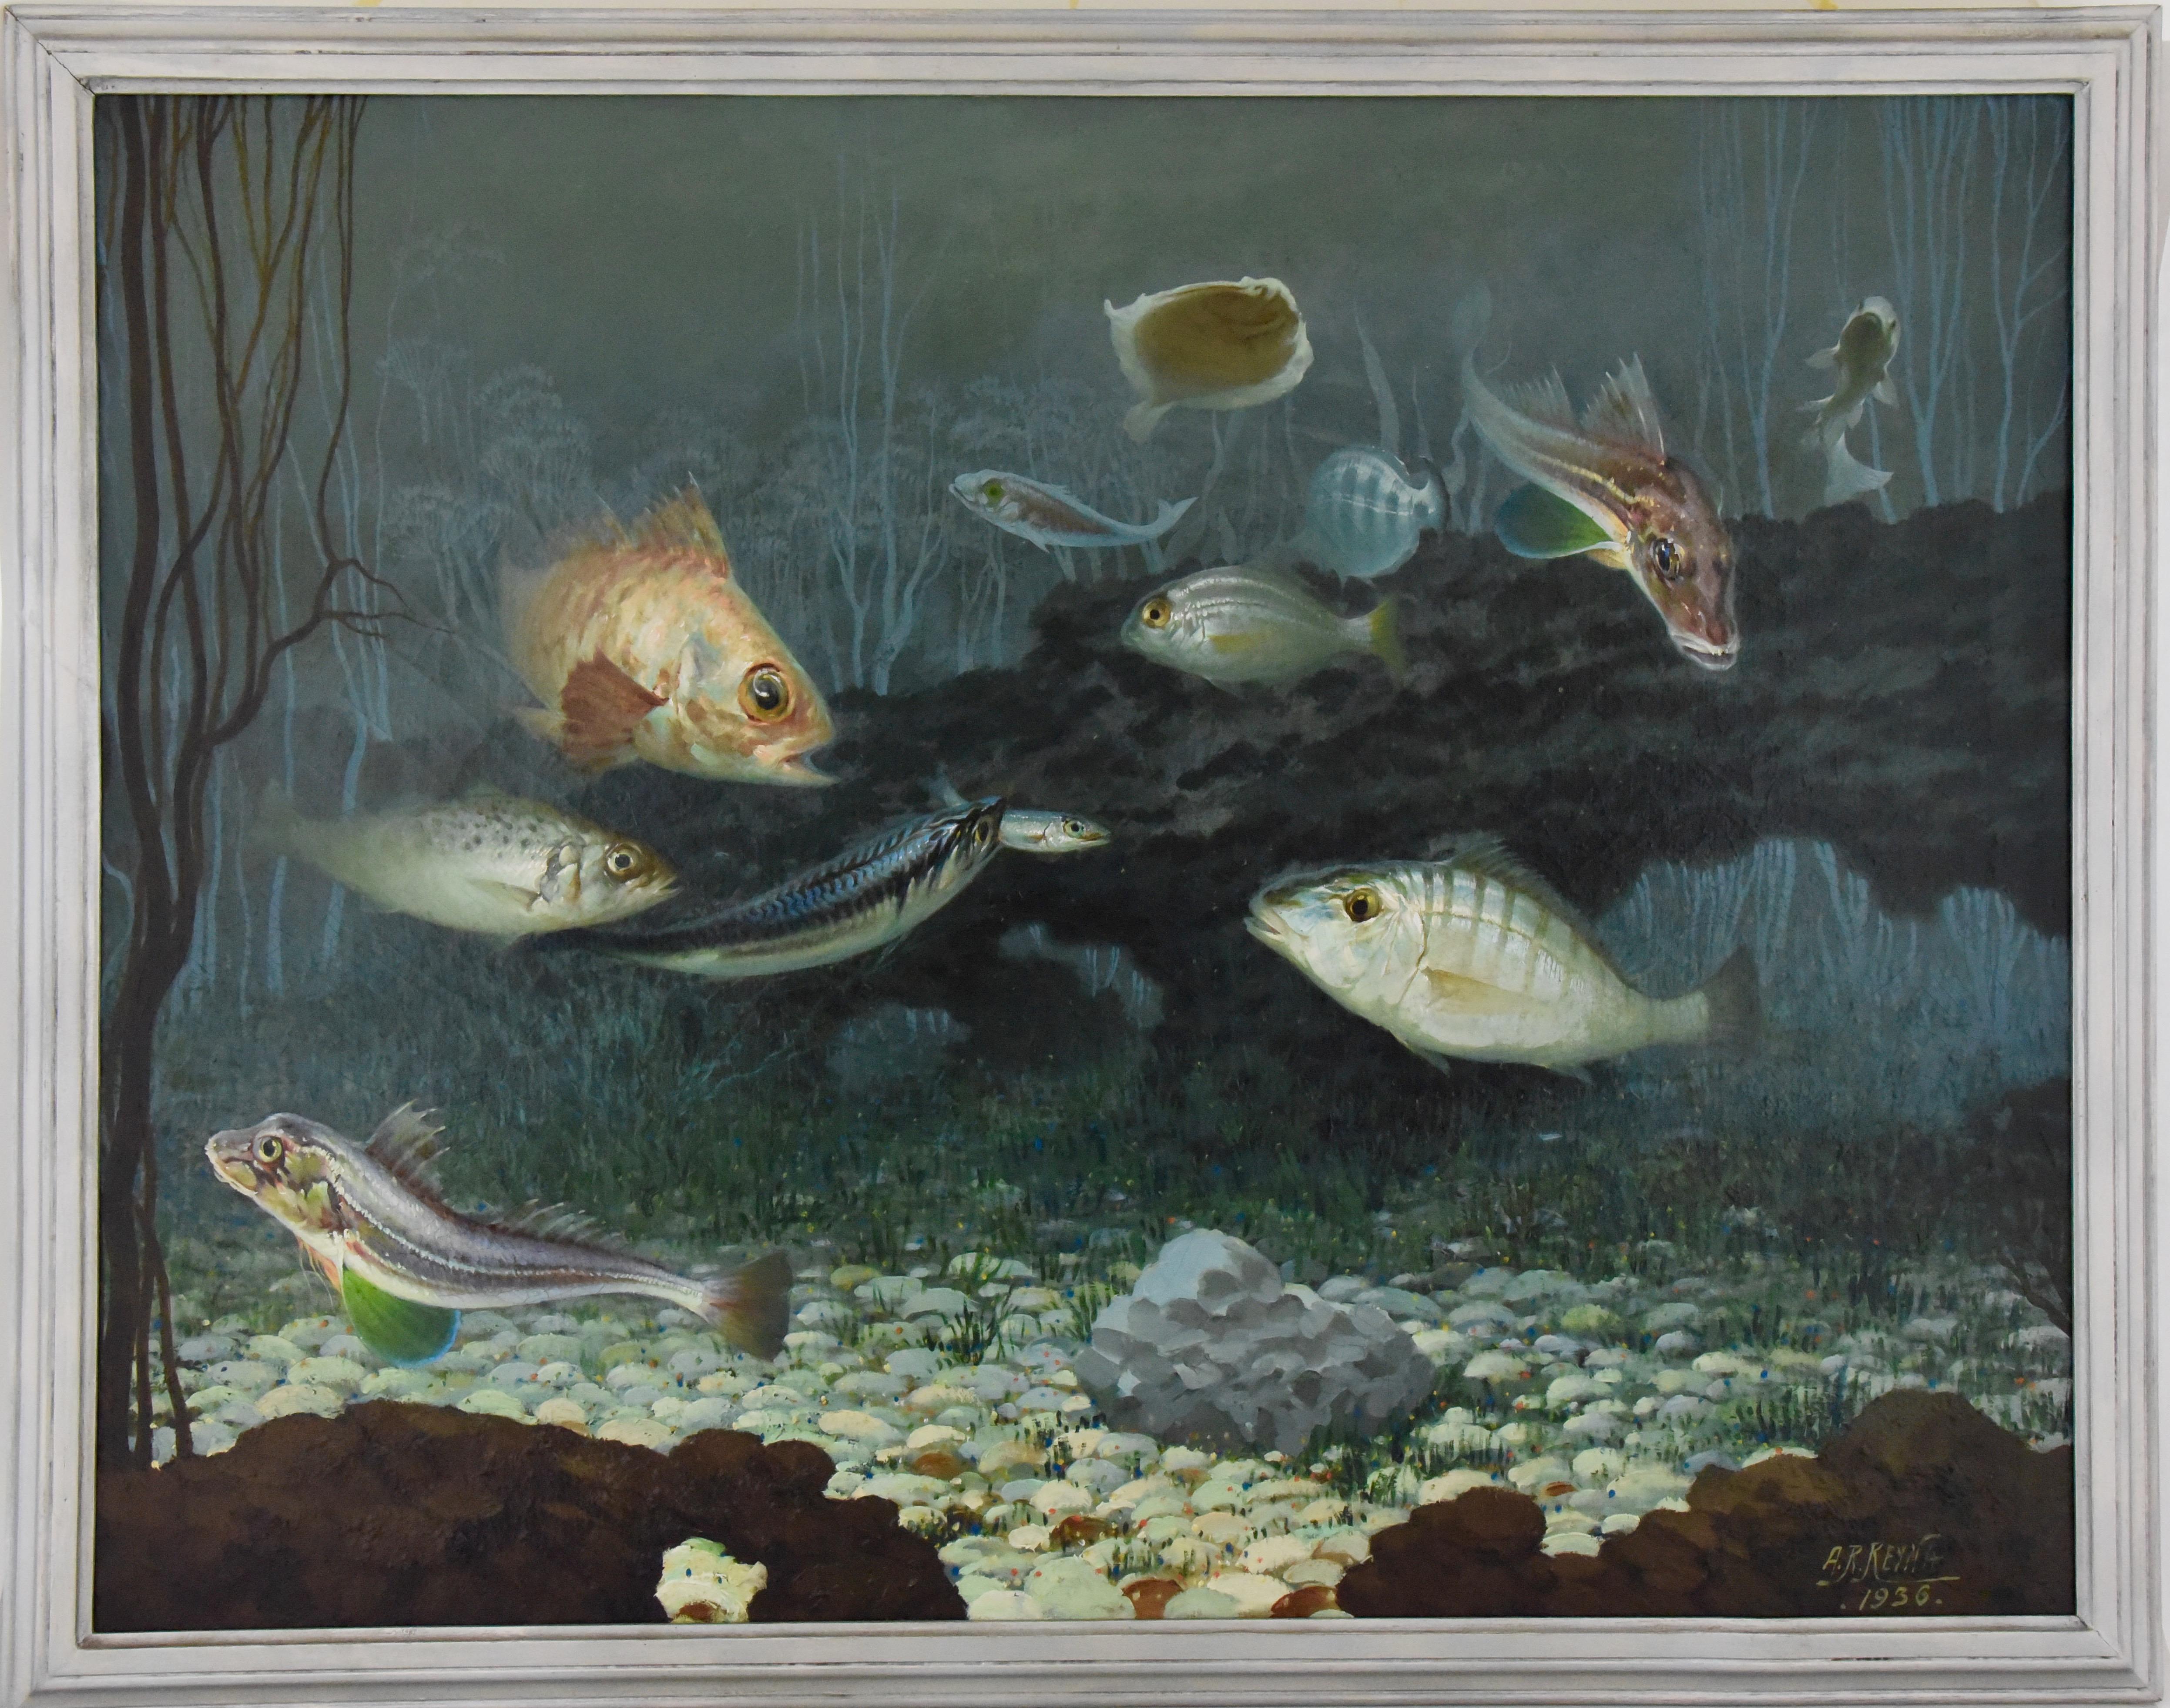 Art Deco oil painting of fish on the bottom of the sea.
Beautiful details and colors. Original frame.
Signed by A. R. Reyna and dated 1936.
Size framed:
H. 83 cm. x L. 105 cm. x W. 3 cm.
H. 32.7 inch x L. 41.3 inch x 1.2 inch.

Size of the